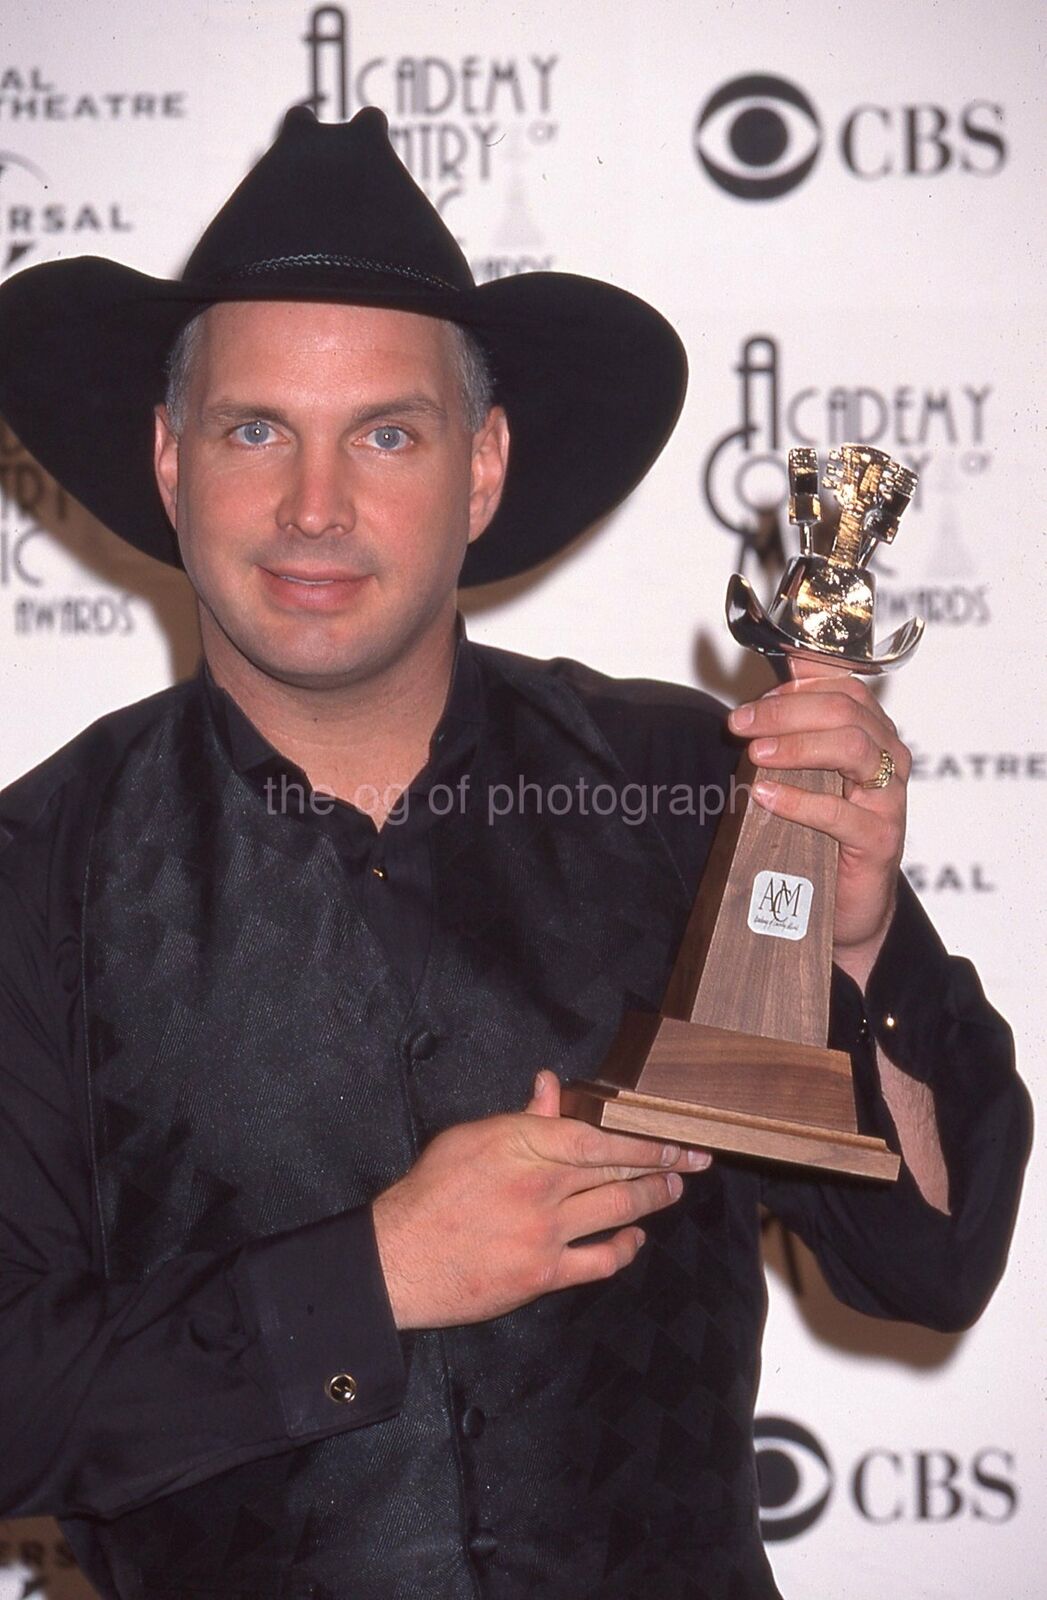 GARTH BROOKS 35mm FOUND SLIDE Transparency COUNTRY MUSIC ICON Photo 010 T 15 A